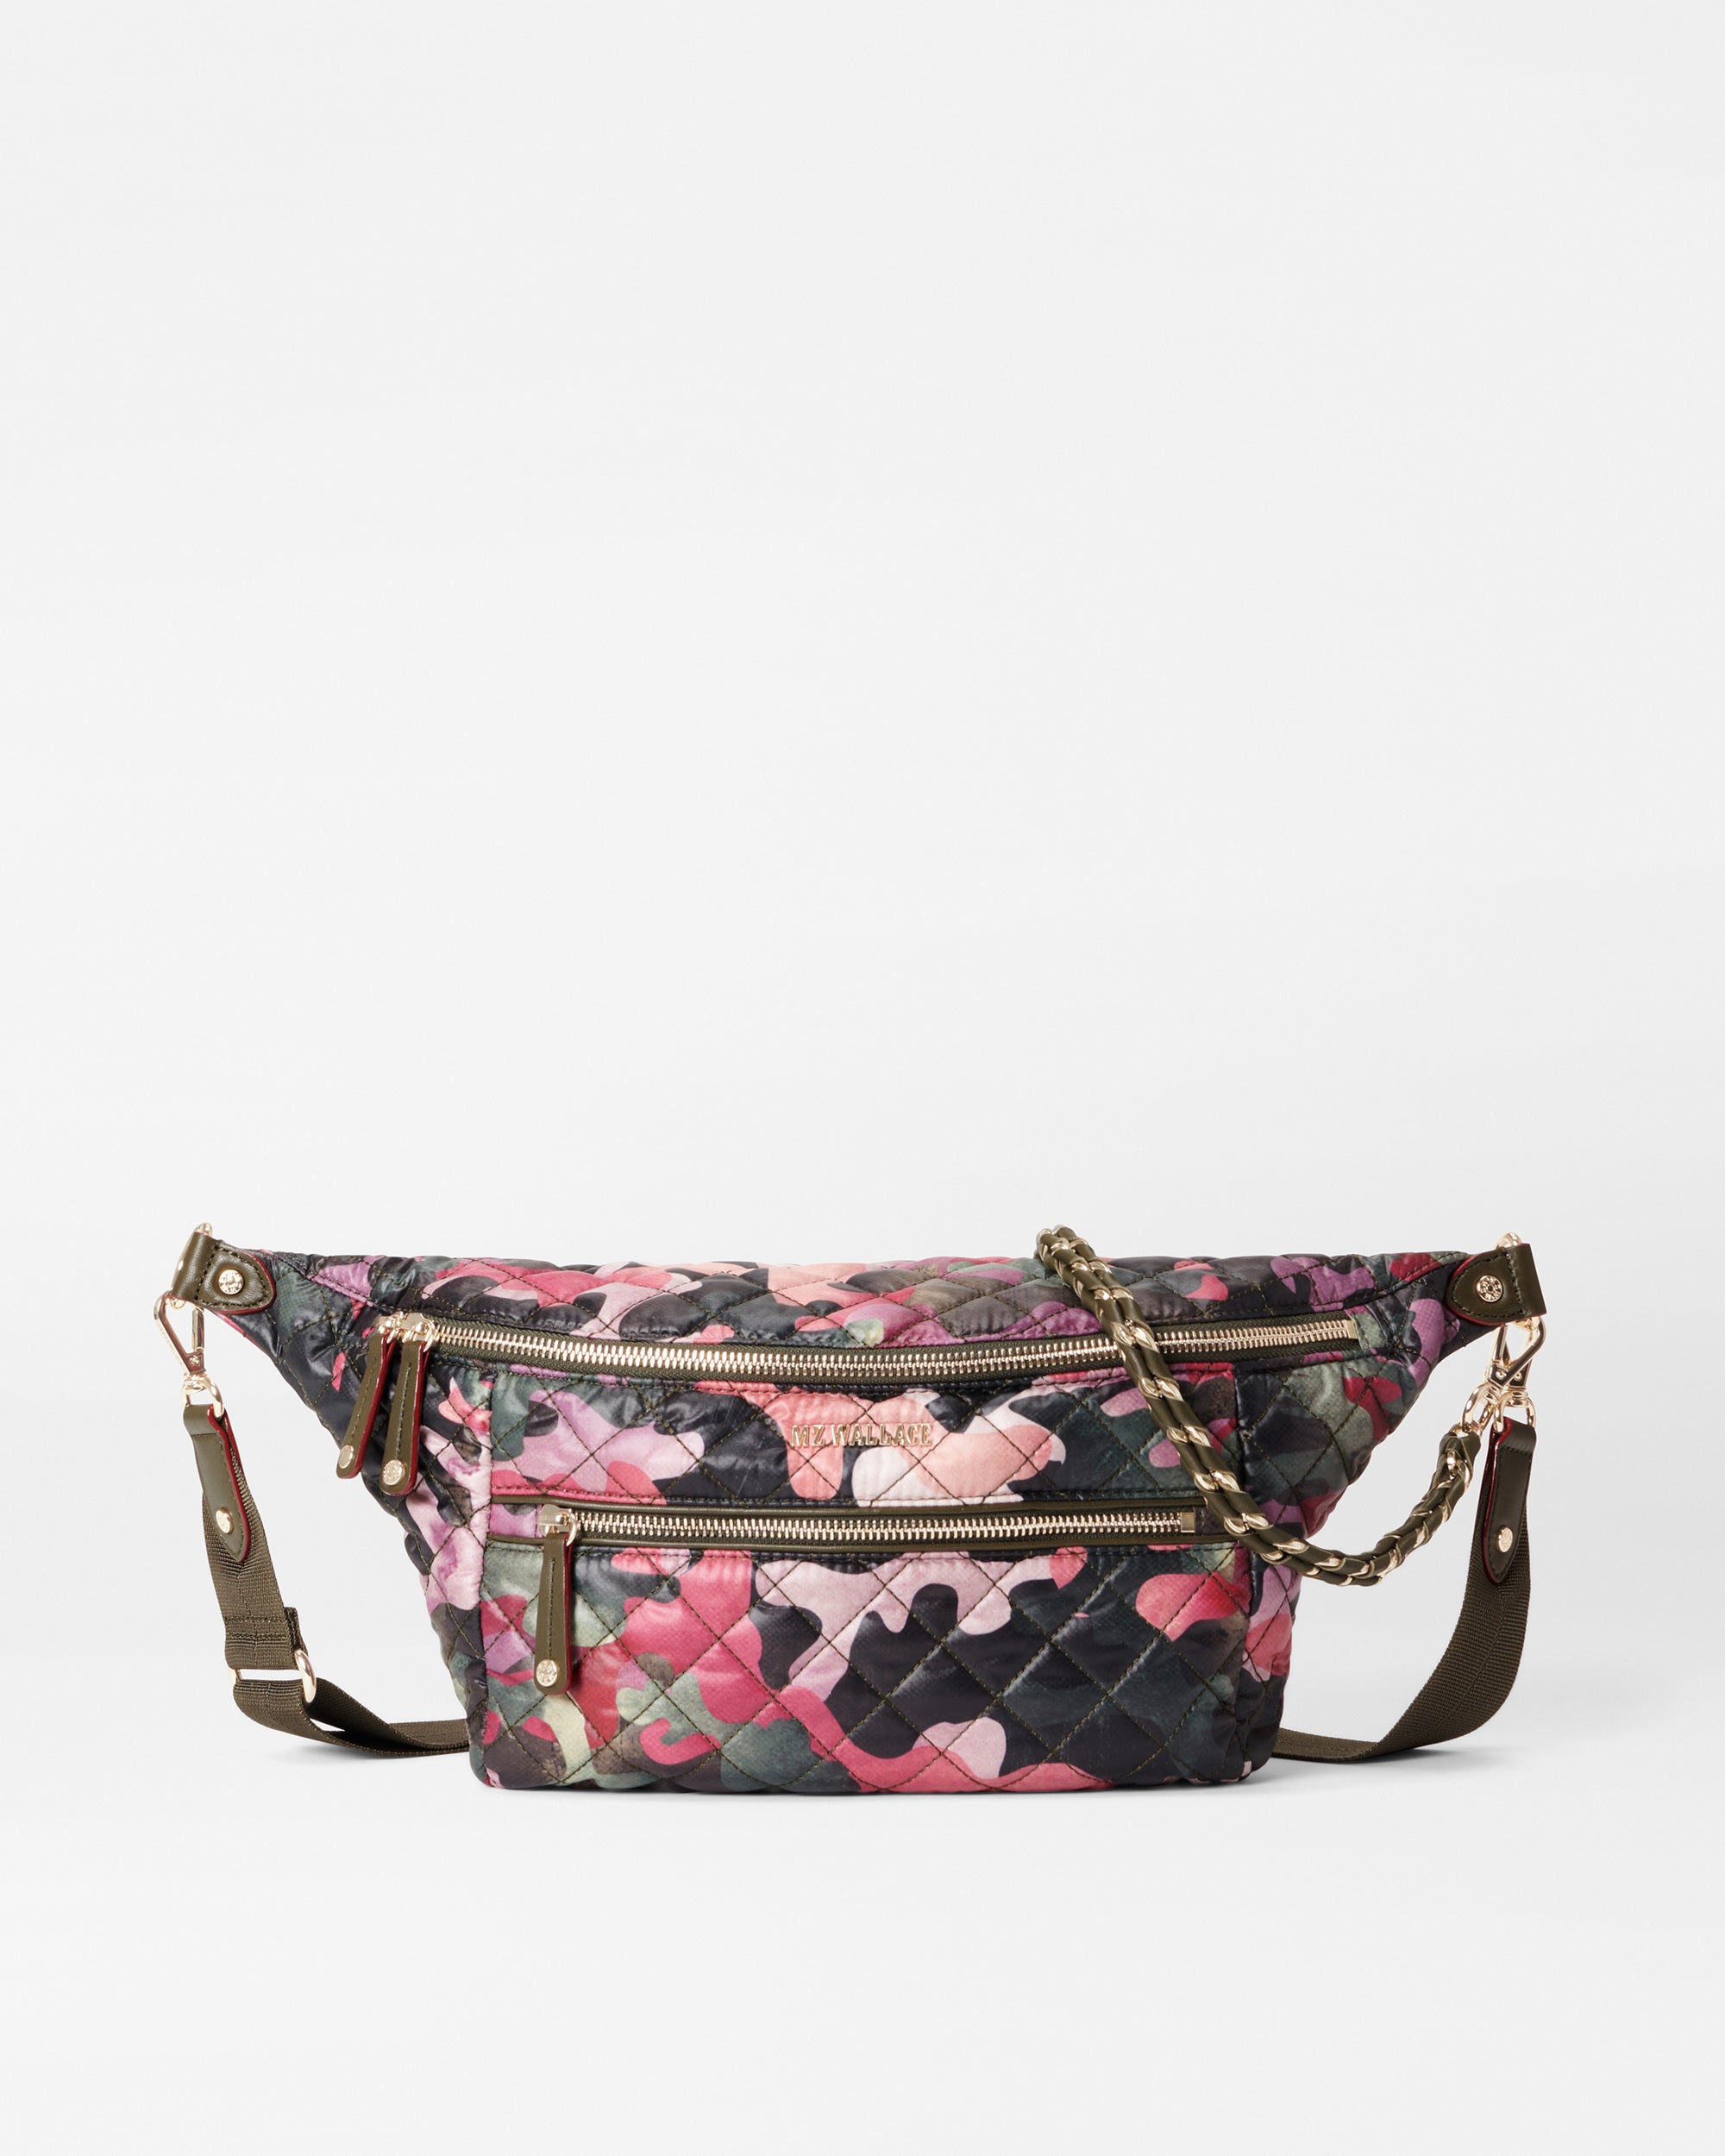 Travel In Style Sling Bag - Hot Pink Fanny Pack Purse